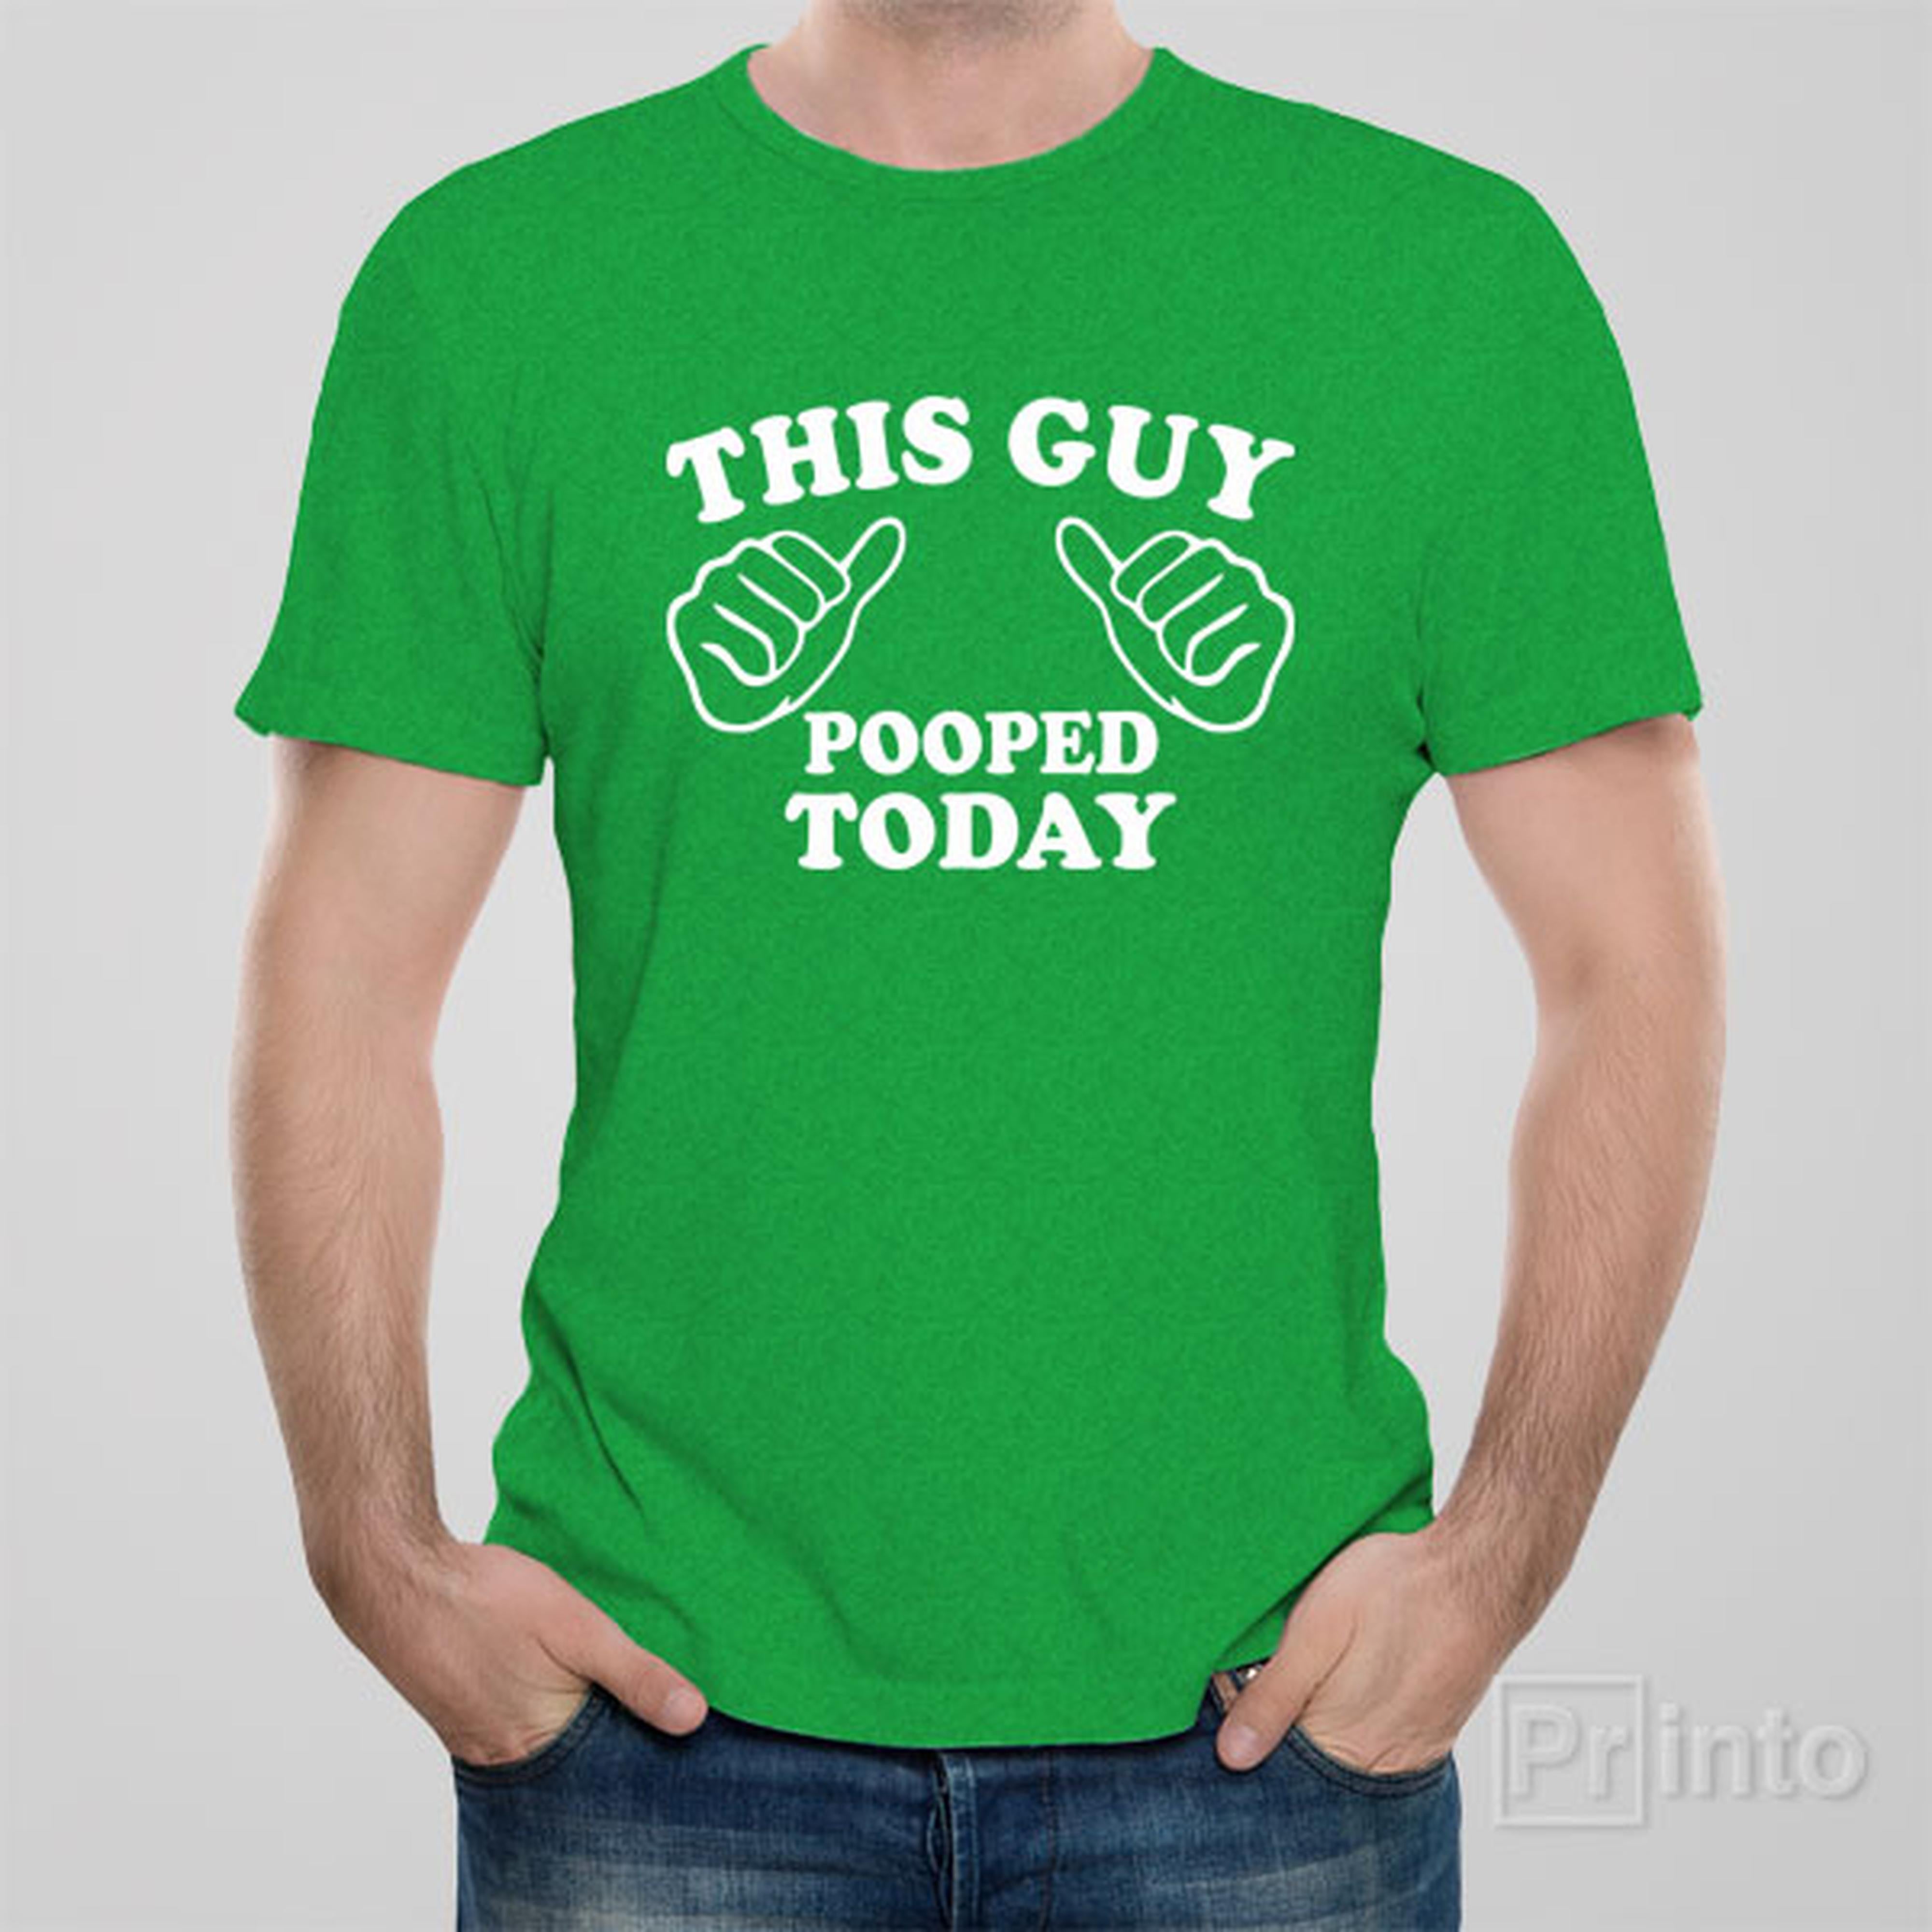 this-guy-pooped-today-t-shirt